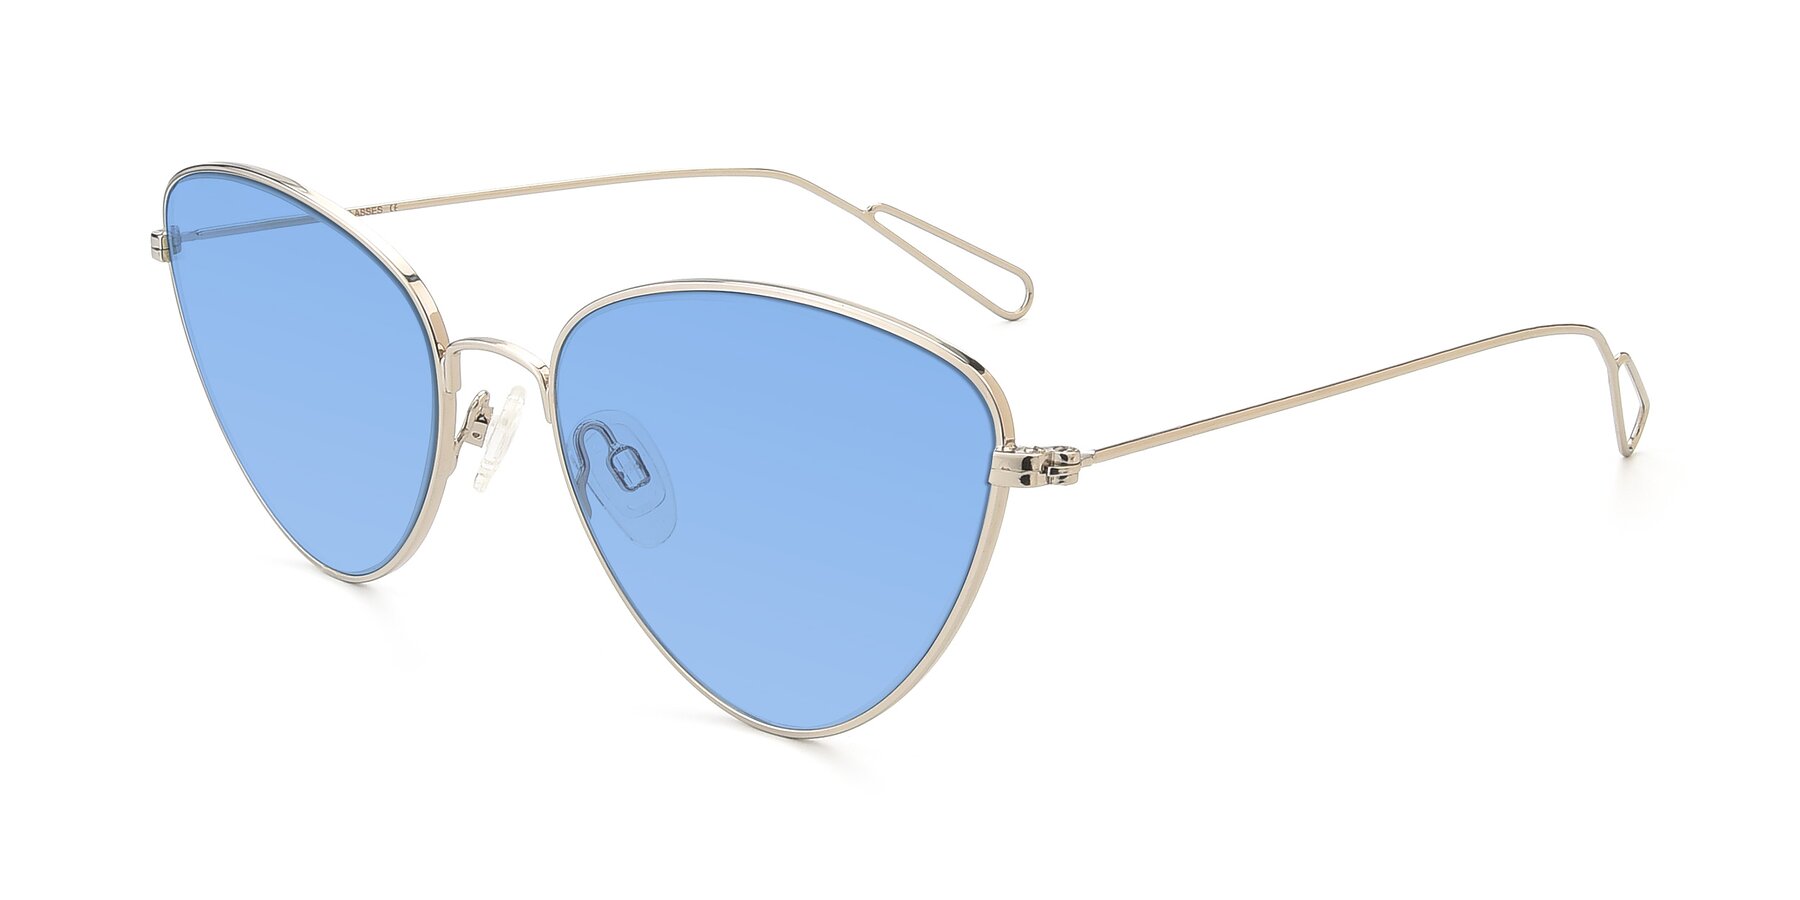 Angle of Butterfly Effect in Silver with Medium Blue Tinted Lenses